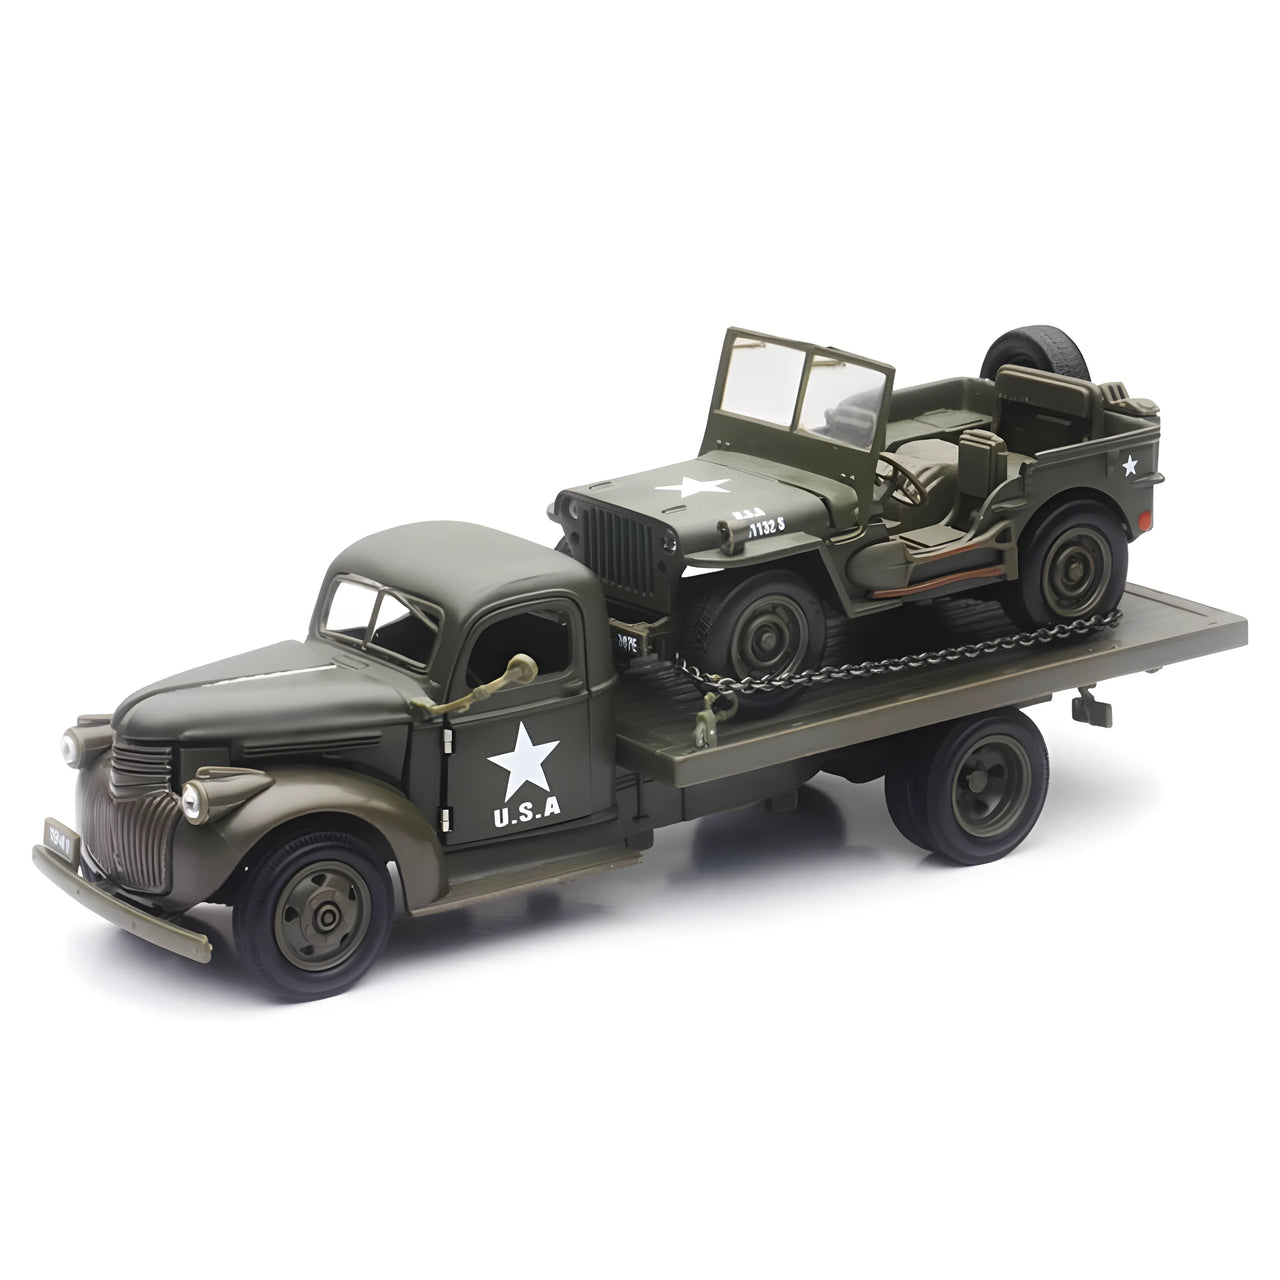 SS-61053B 1941 Chevy Truck Military Scale 1:32